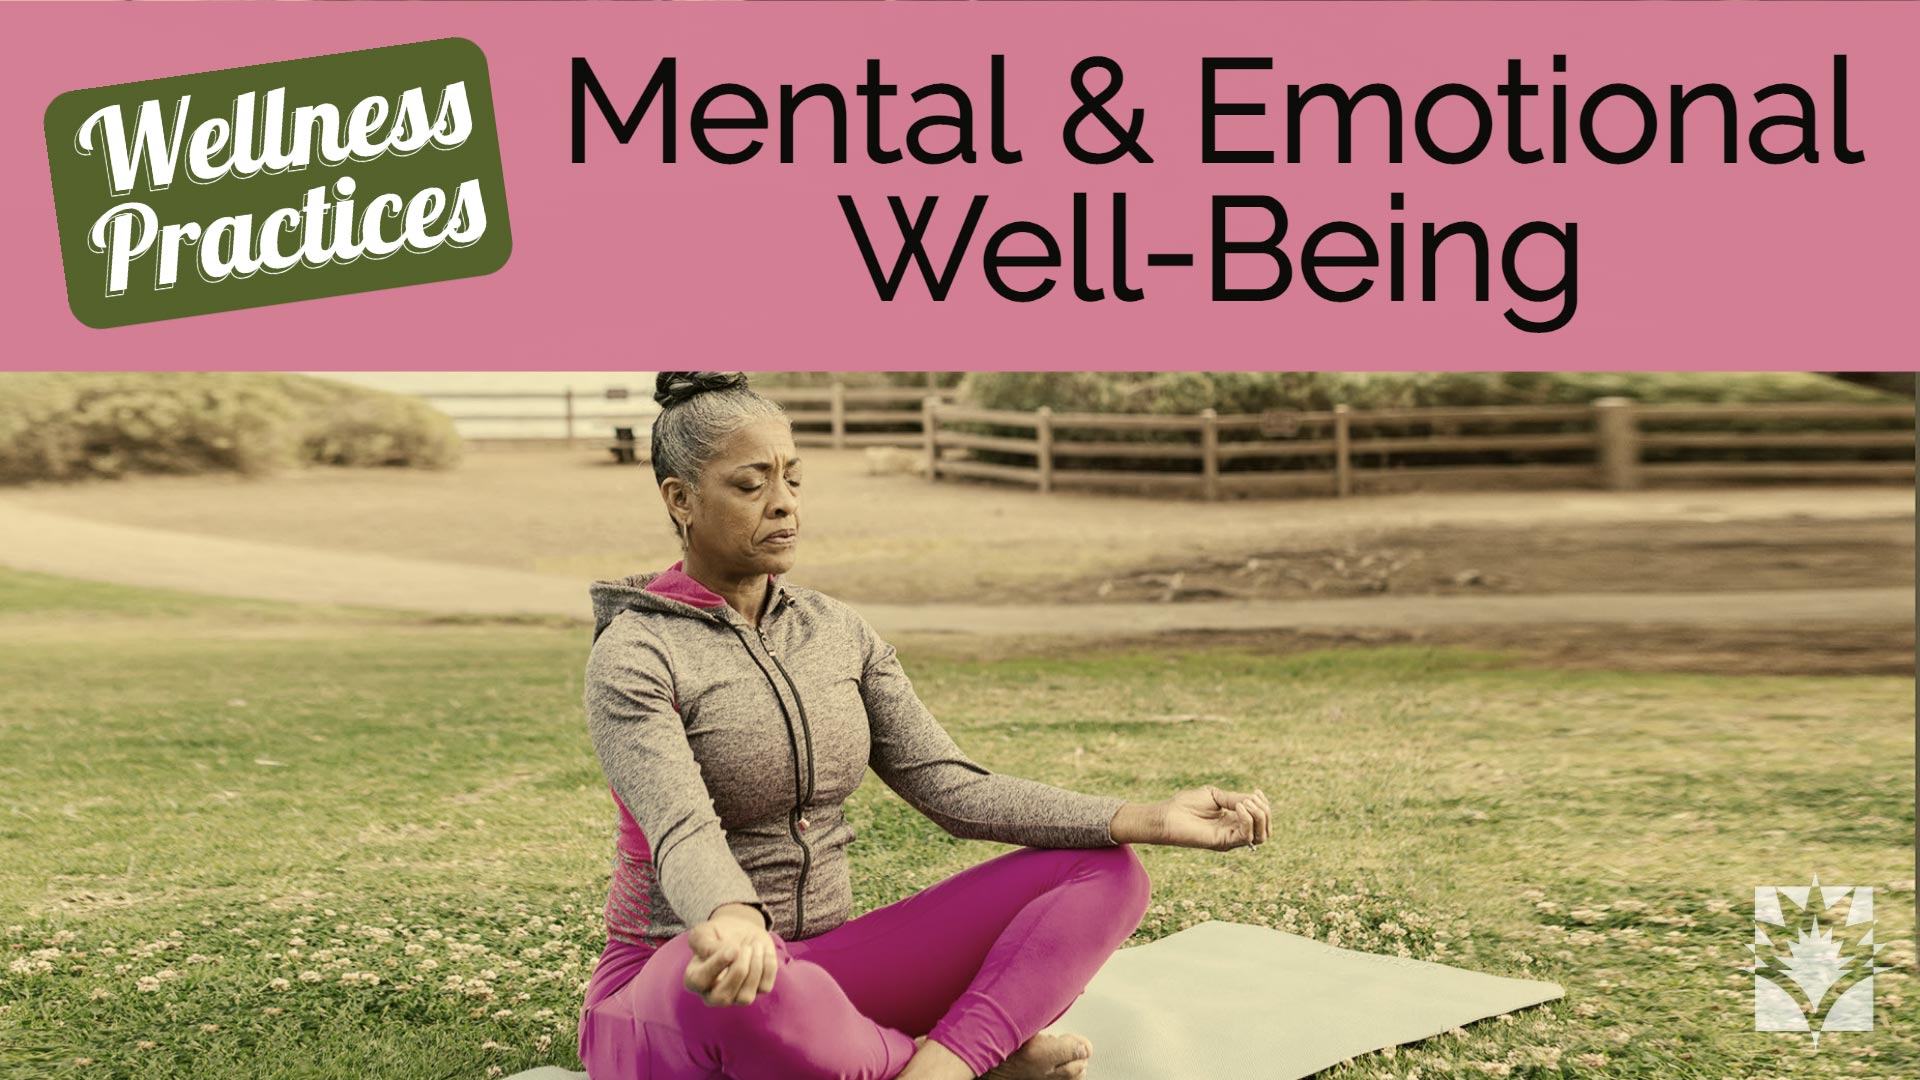 Mental & Emotional Well-Being